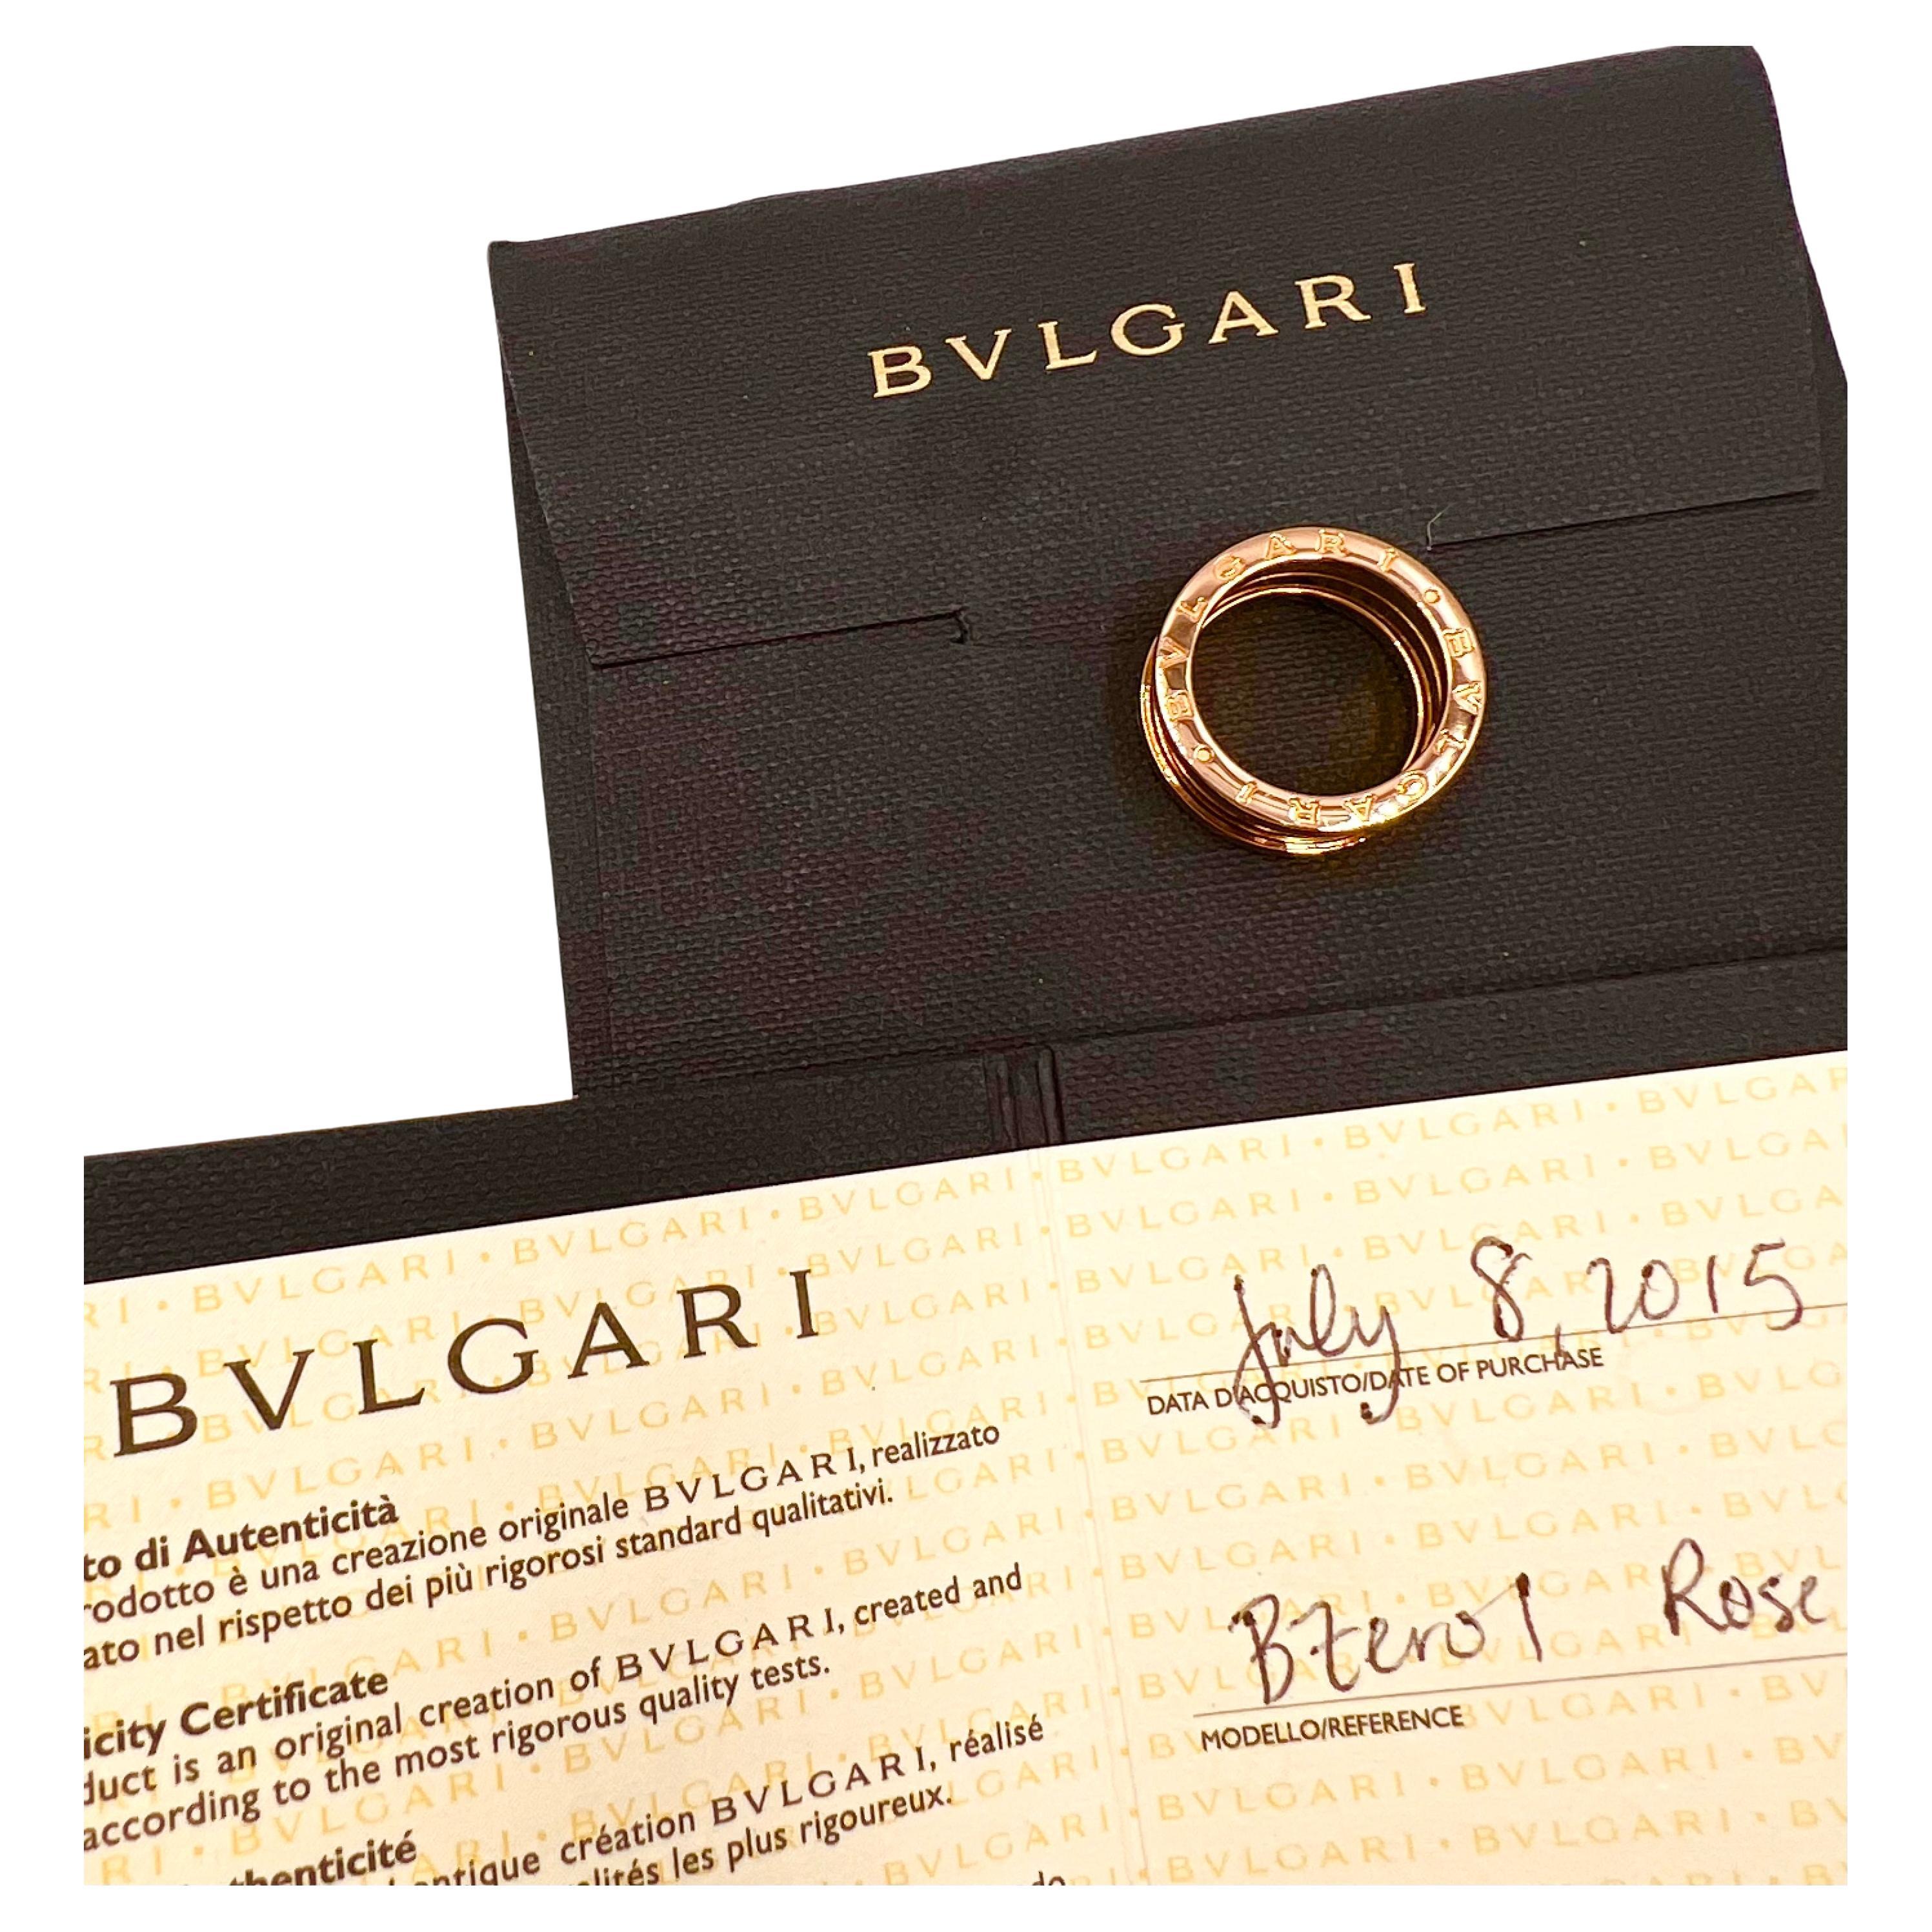 BVLGARI B.zero1 3-band ring in polished 18k rose gold.  Expandable accordion design, measuring 7.8mm expanding to approximately 9.55mm in width. Flat edge of both sides signed 'BVLGARI'. Finger size 5.5. Includes Bvlgari ring box, as well as